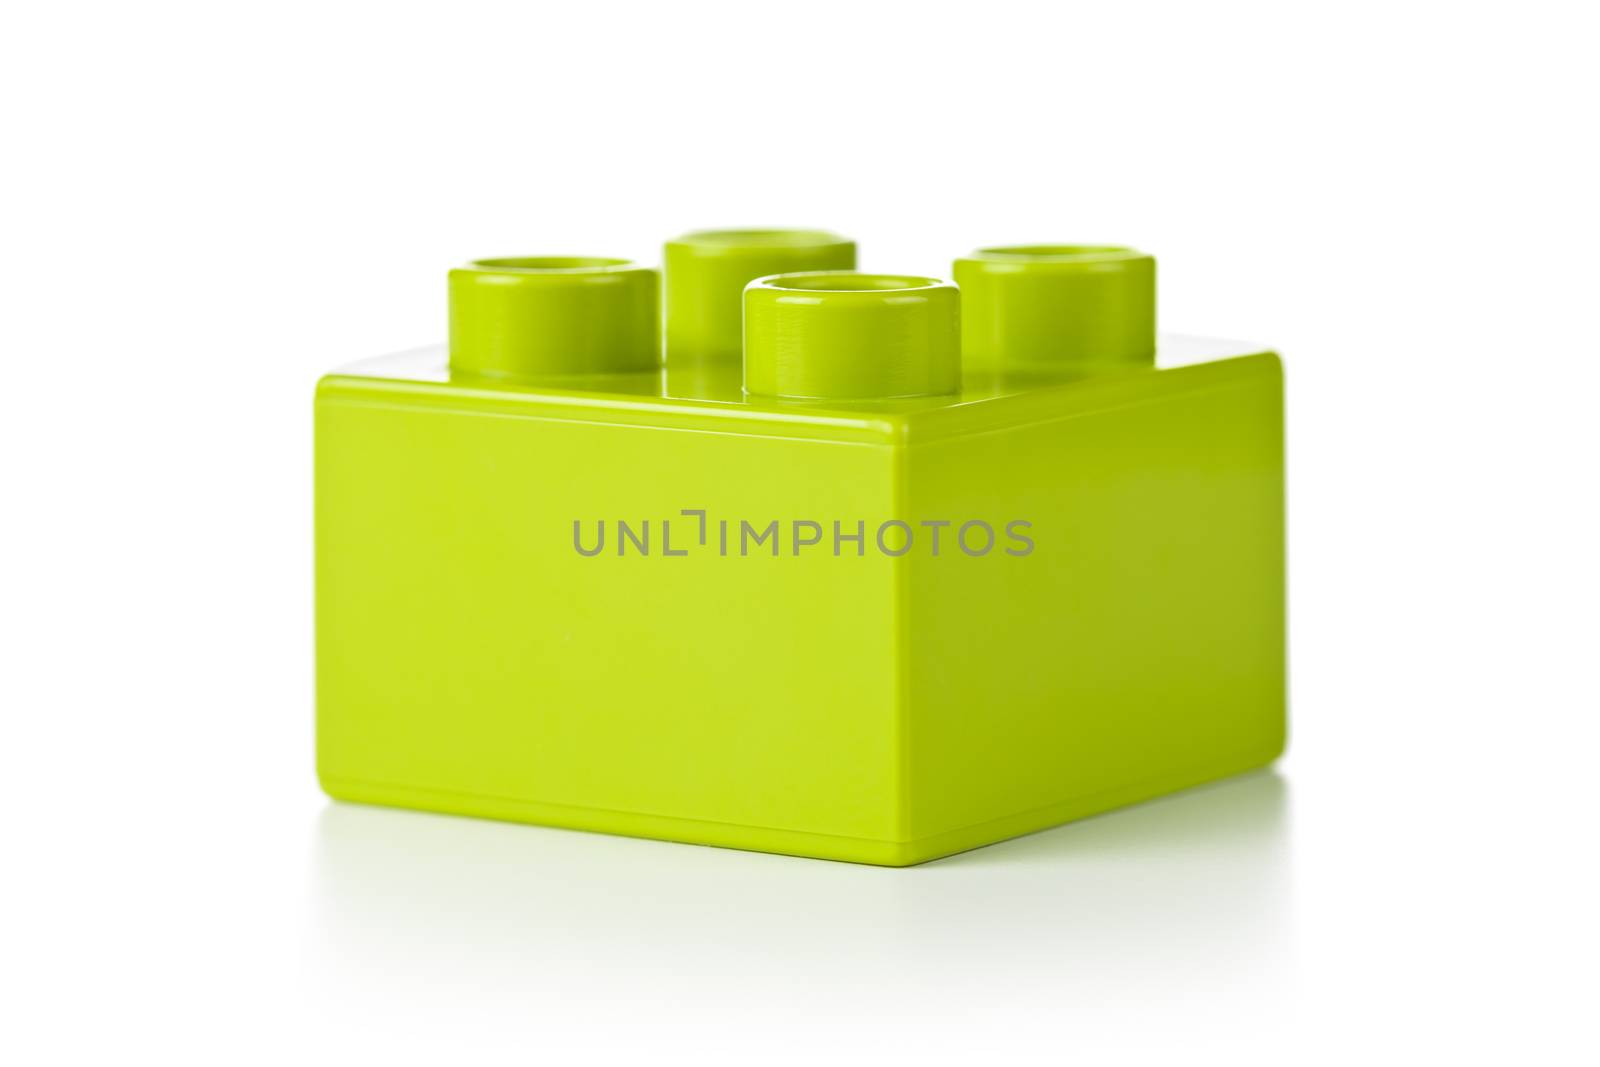 Plastic toy block, green color, on white background